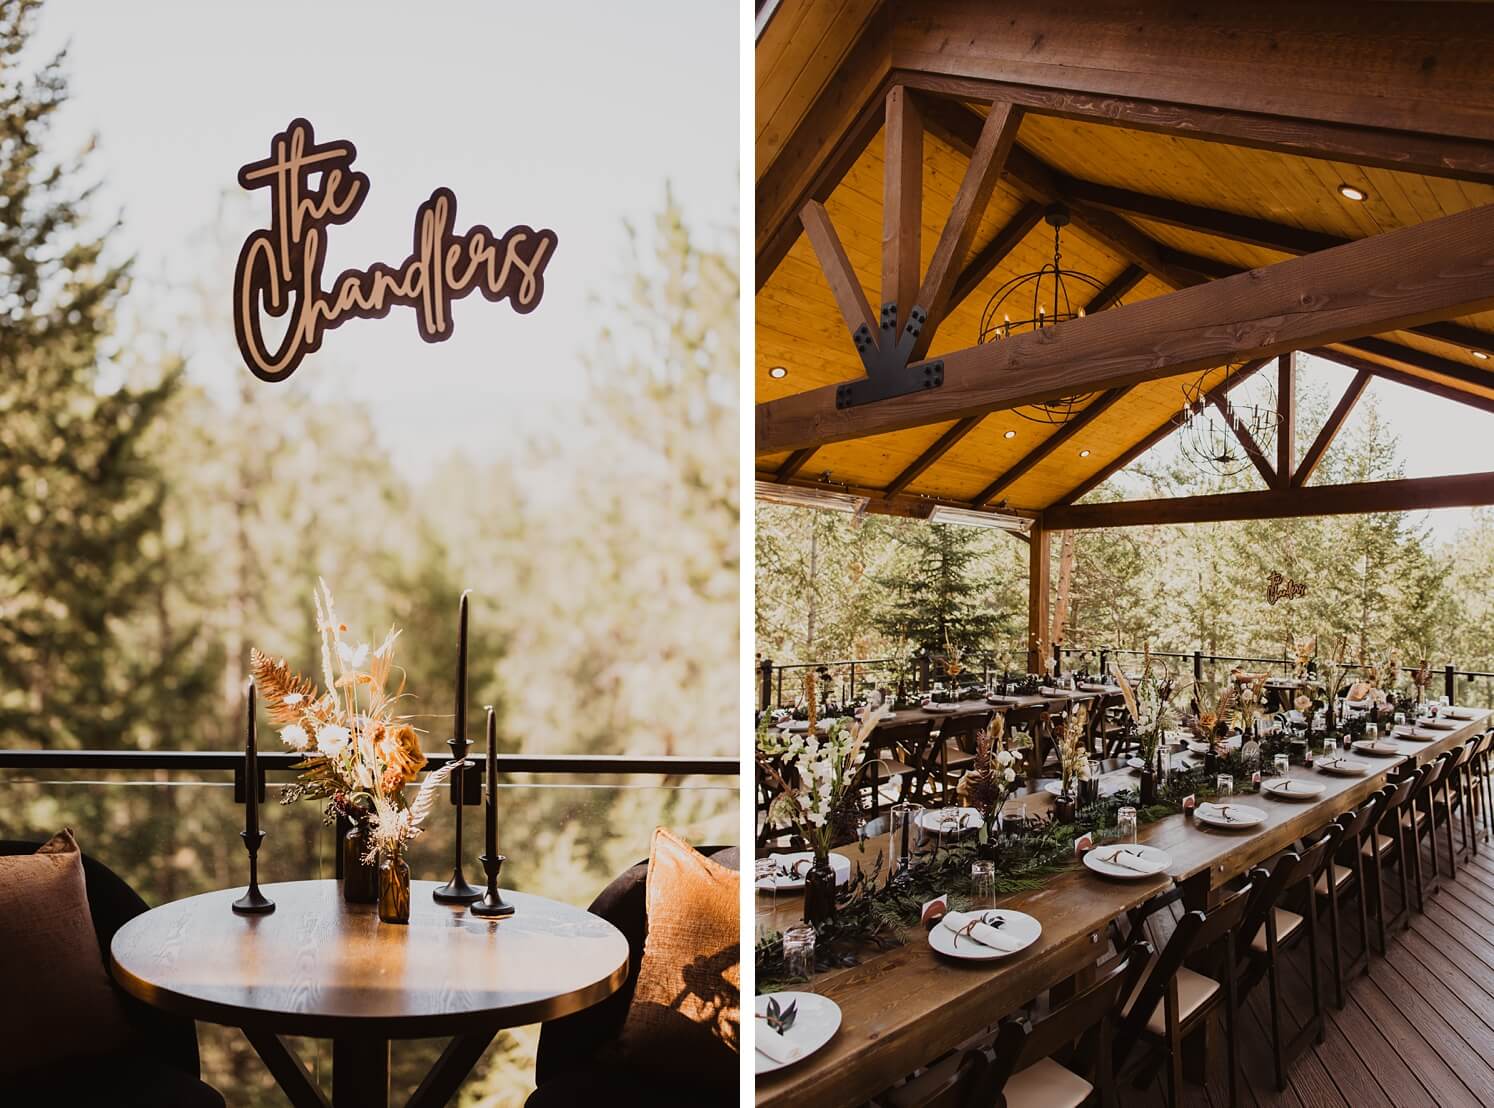 Last name sign hanging above sweetheart table | boho wedding decor at Juniper Mountain House | McArthur Weddings and Events